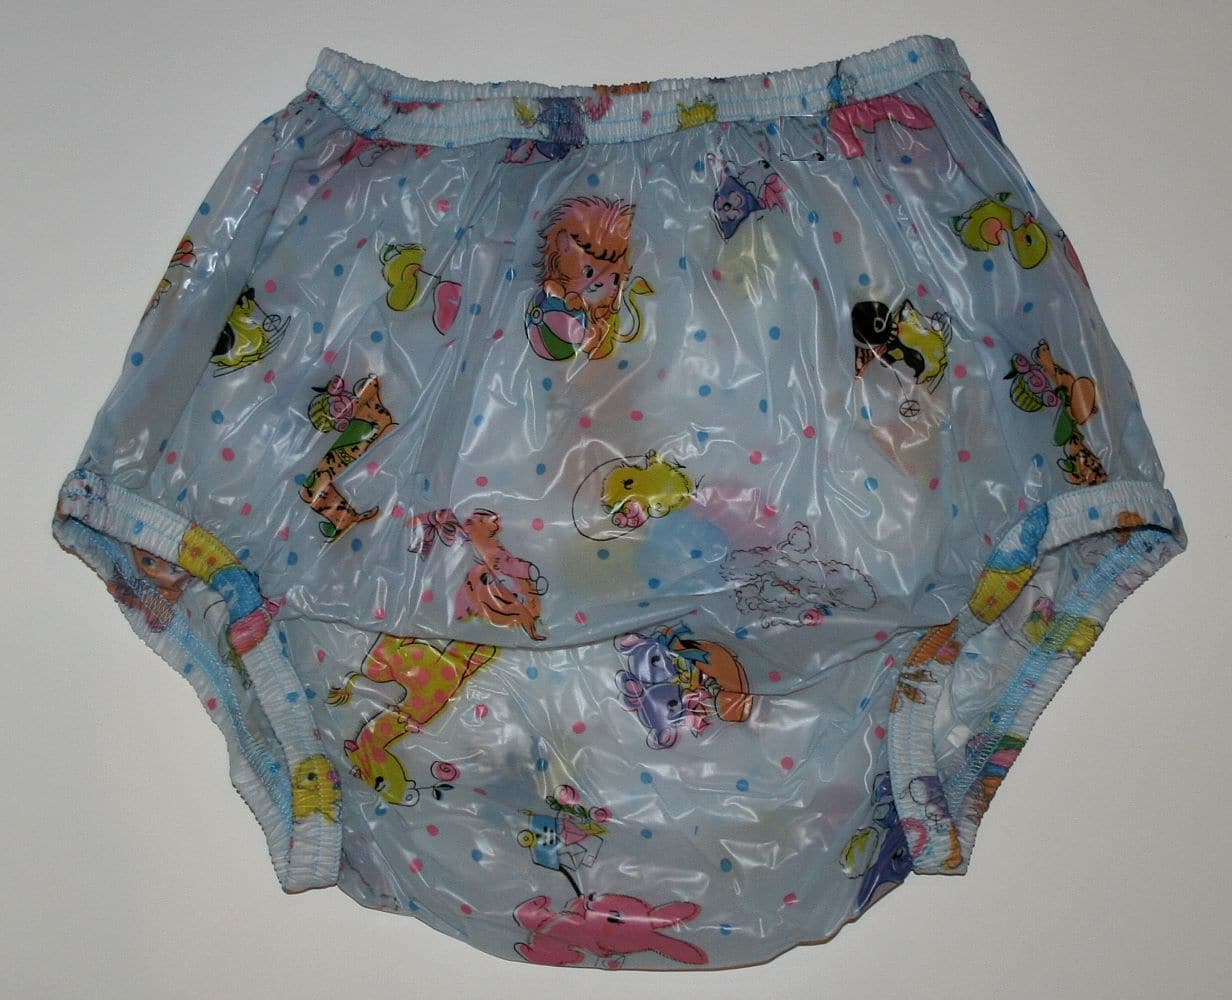 PVC comfort diaper pants rubber pants adult baby (GWHC) - many colors to choose from